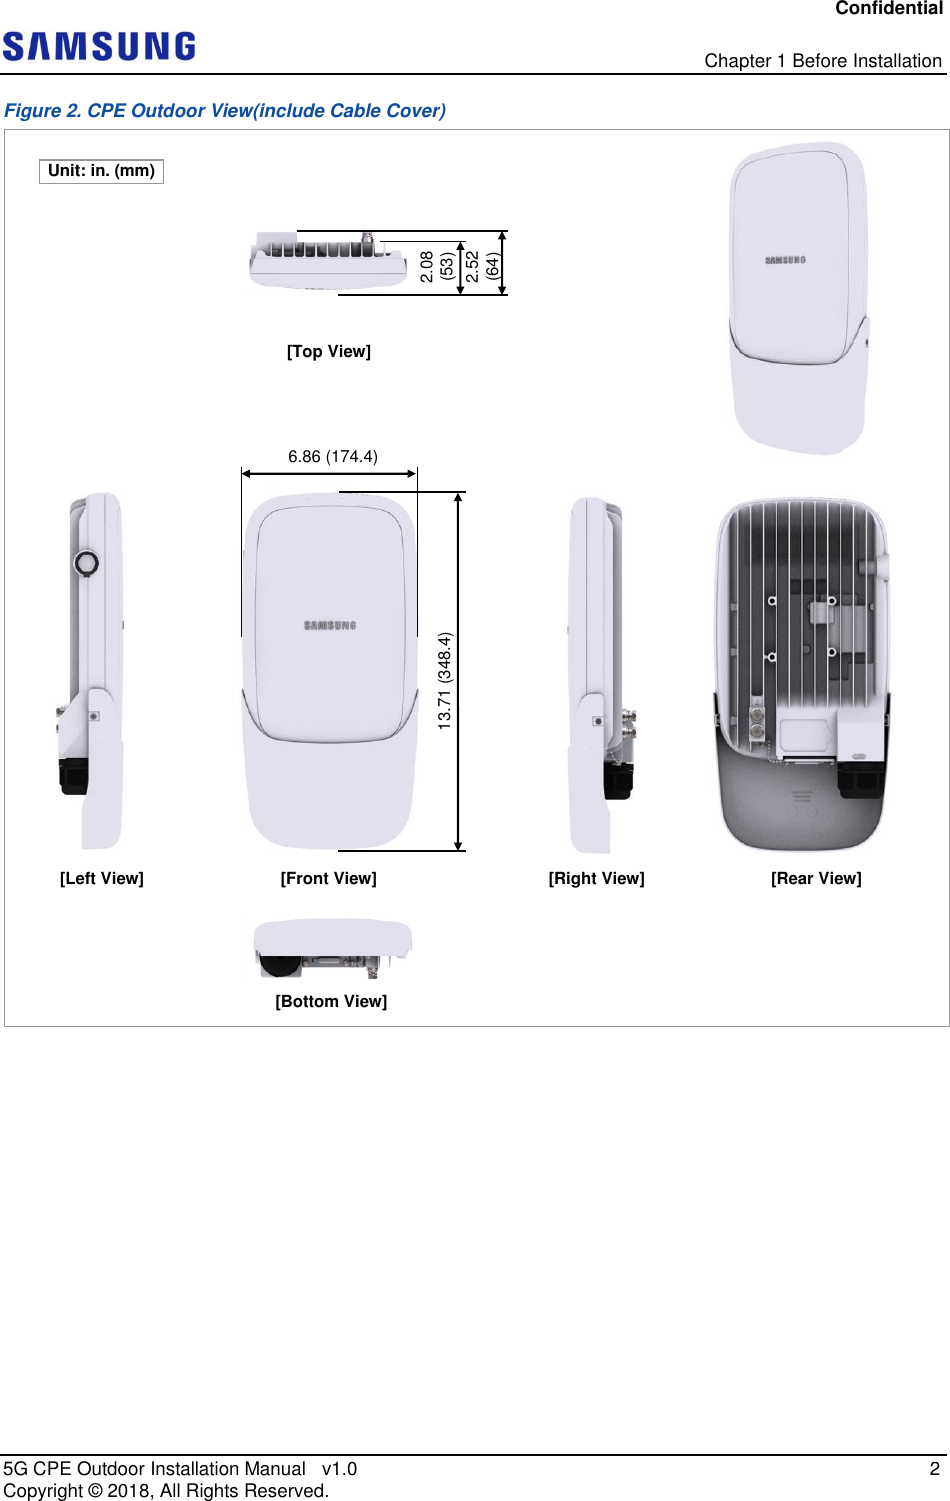 Confidential   Chapter 1 Before Installation 5G CPE Outdoor Installation Manual   v1.0    2 Copyright ©  2018, All Rights Reserved. Figure 2. CPE Outdoor View(include Cable Cover)    [Bottom View] [Top View] [Left View] 13.71 (348.4) 2.08 (53) Unit: in. (mm) [Right View] [Rear View] [Front View] 6.86 (174.4)  2.52 (64) 